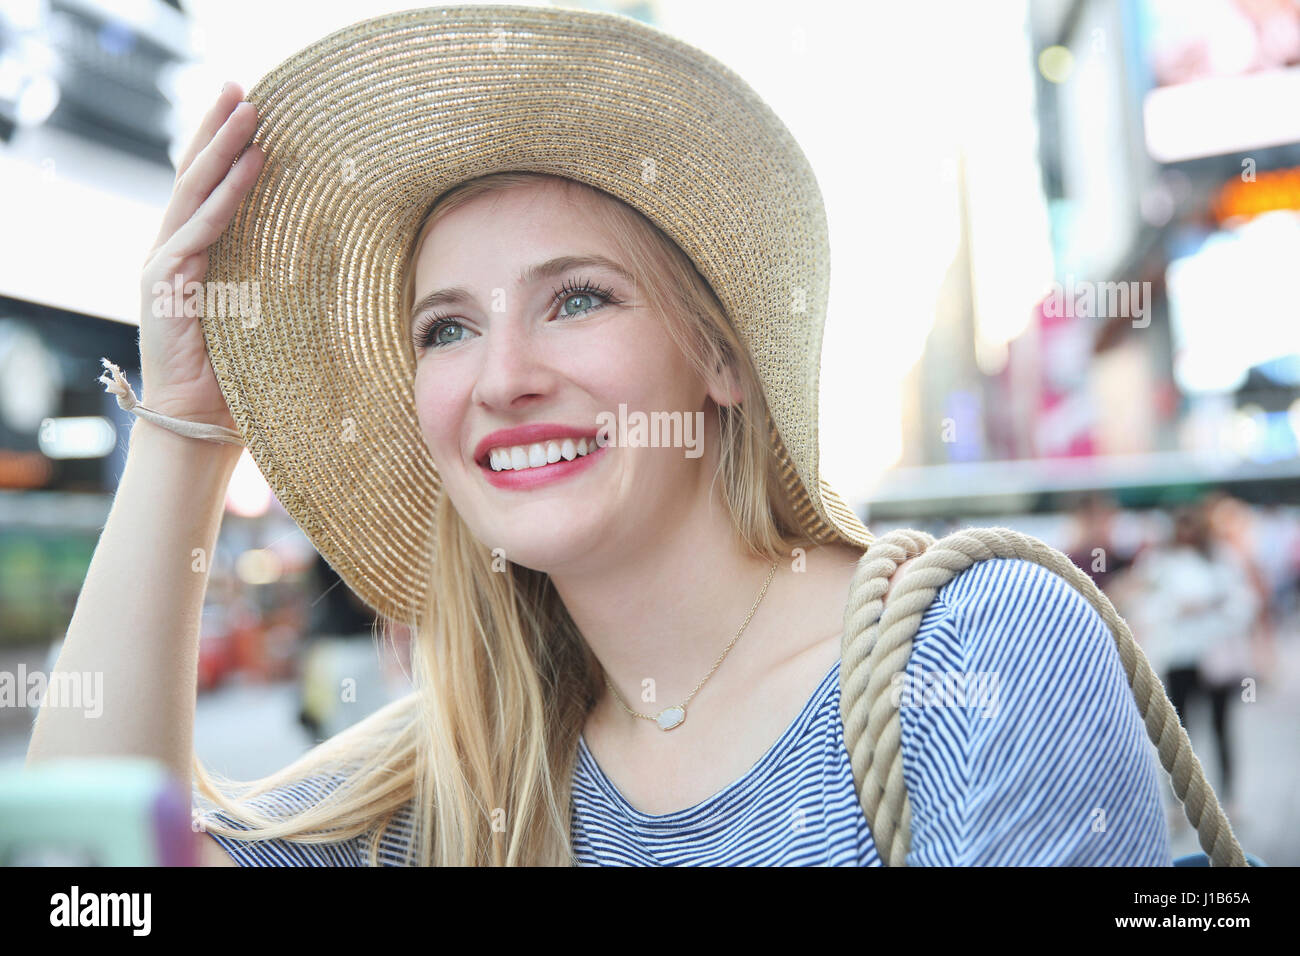 Portrait of smiling Caucasian woman wearing hat in city Banque D'Images